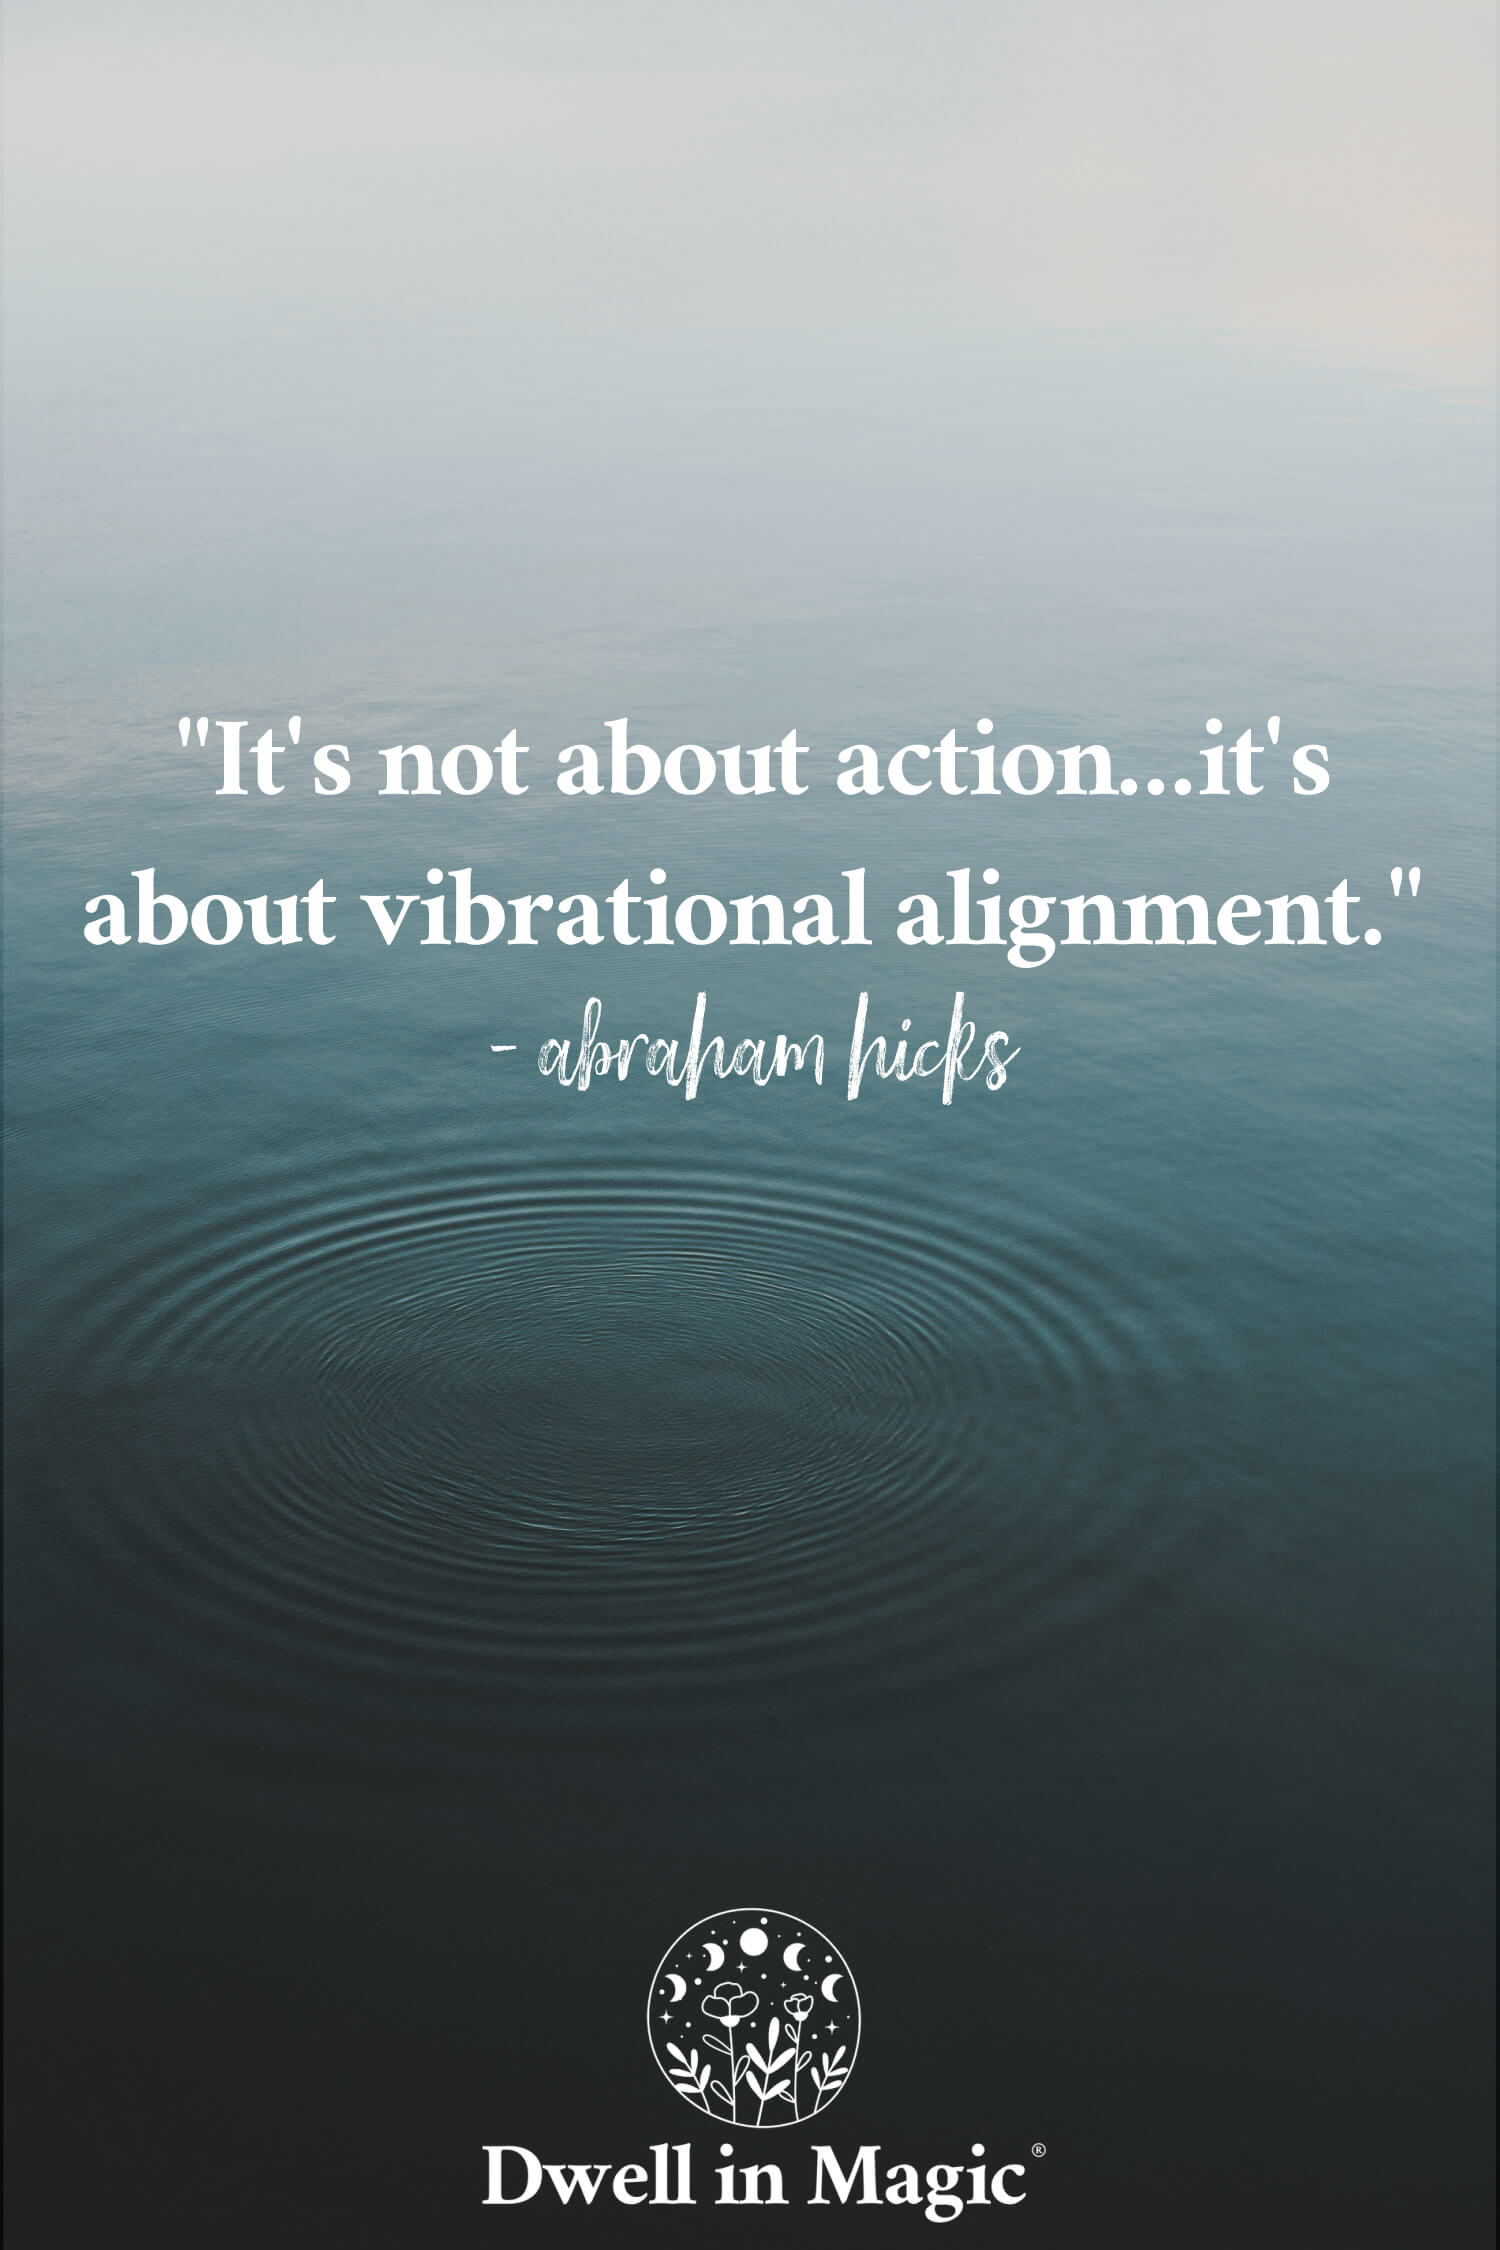 Redefining being productive. "It's not about action, it's about vibrational alignment." - Abraham Hicks.